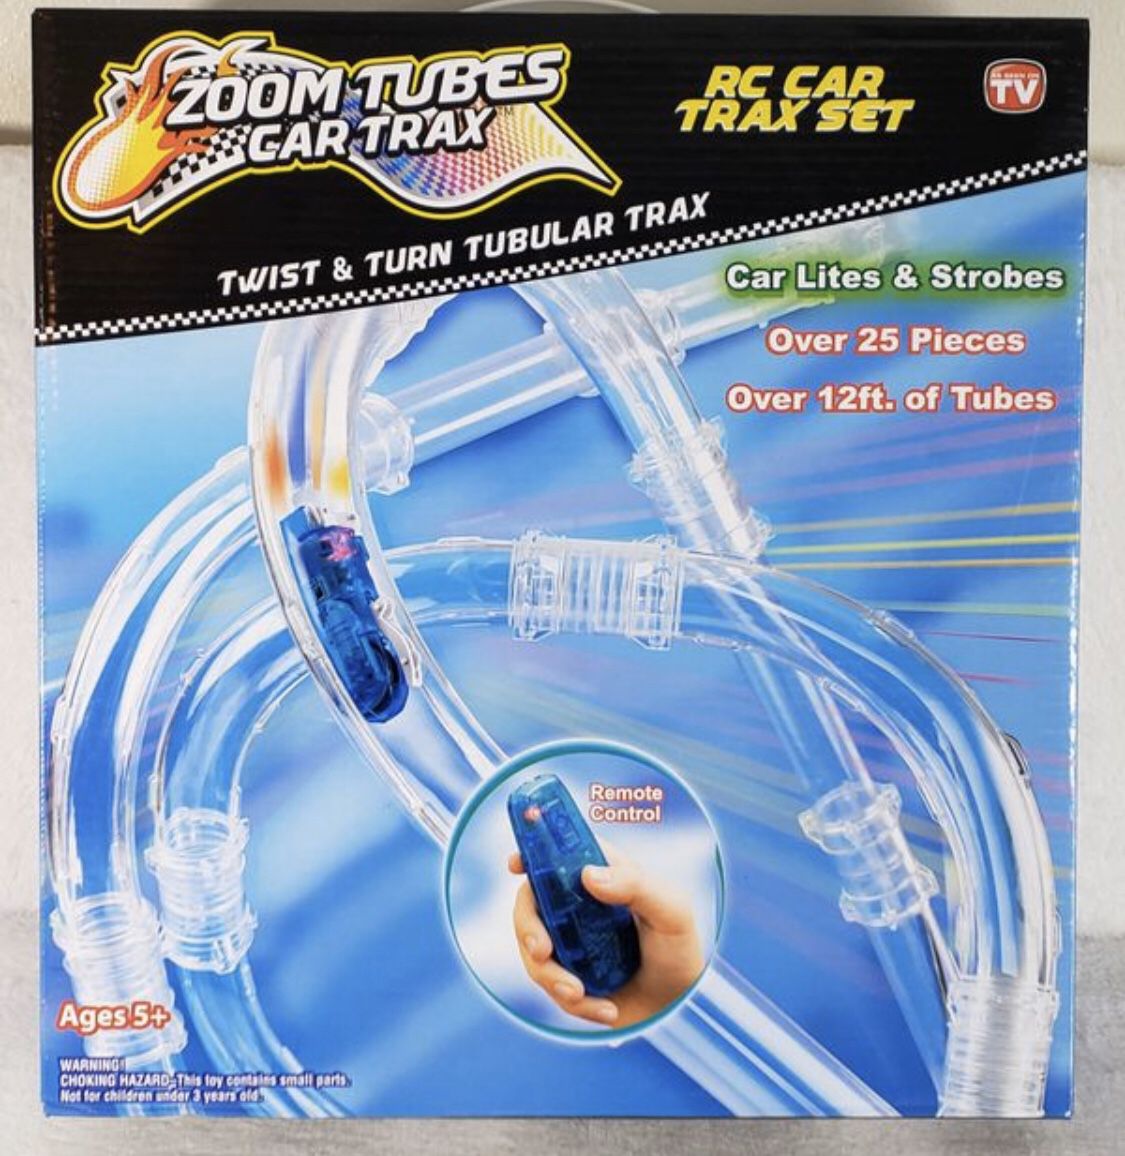 New ZOOM TUBES CAR TRAX, 25-Pc RC Car Trax Set with 1 Blue Racer and Over 12ft of Tubes (As Seen on TV)(pick up only)